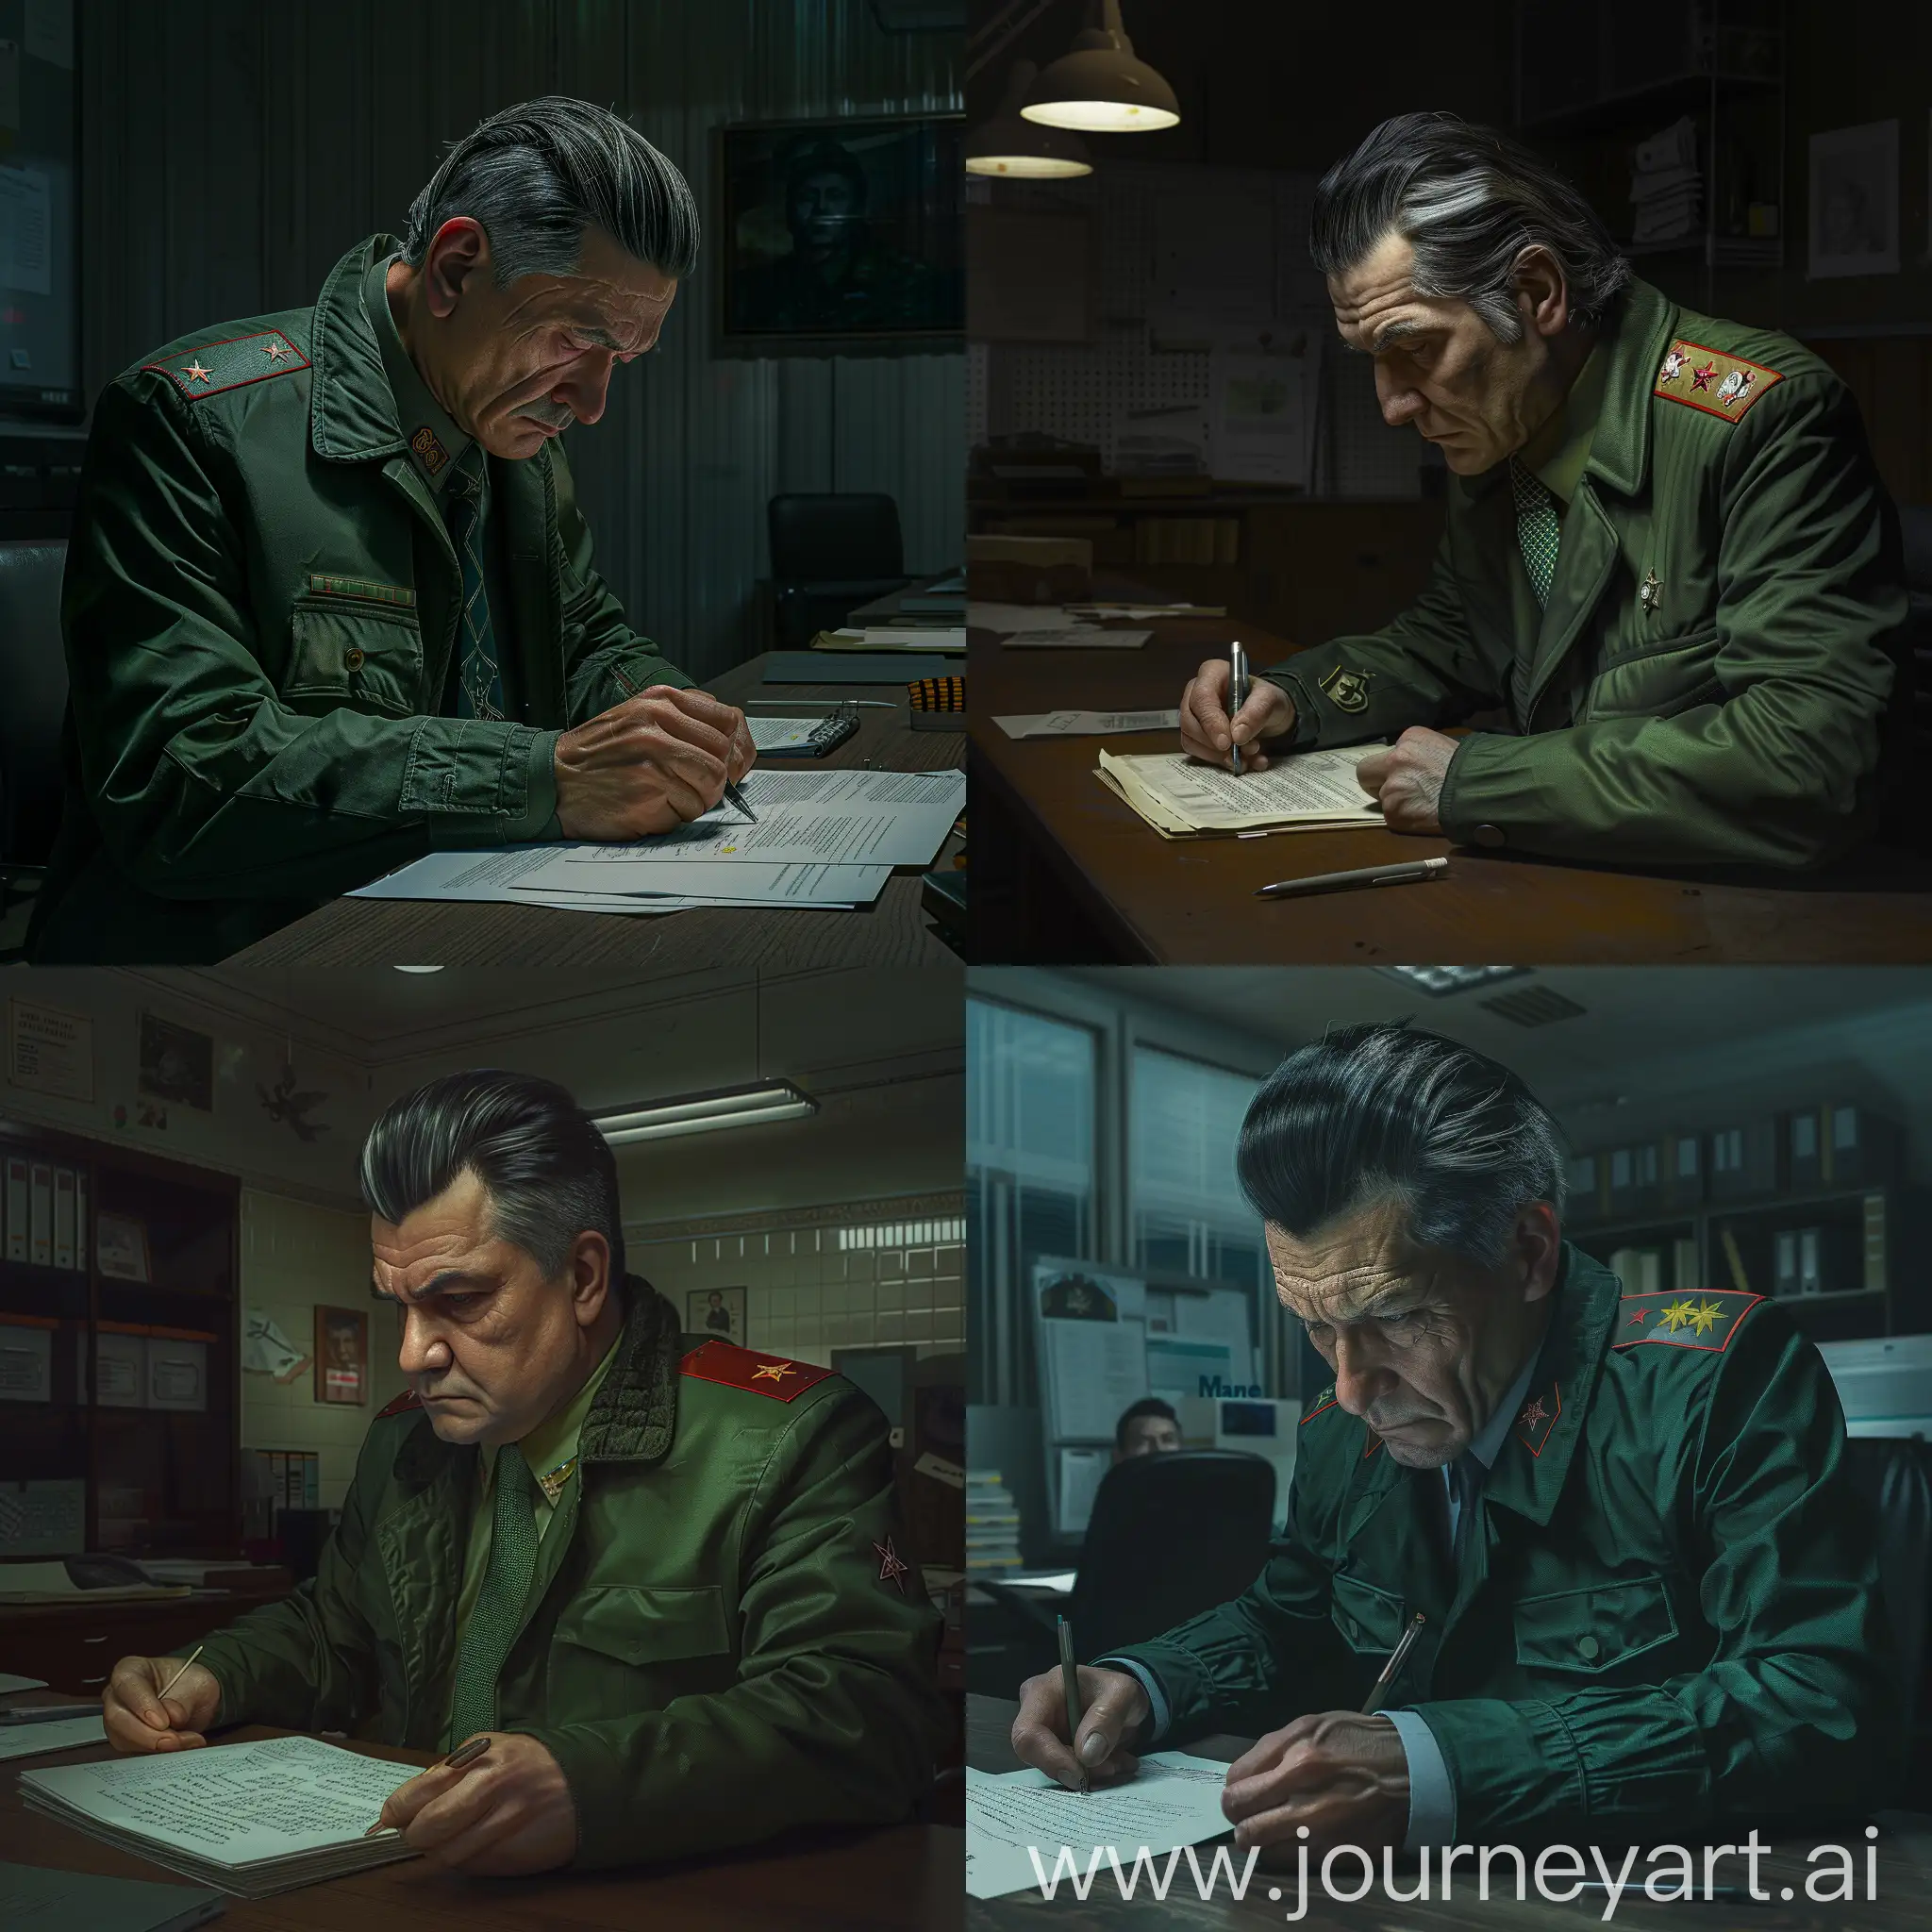 An office, gloomy lighting, a man is sitting at the end of the office, black hair with gray slicked back, wrinkles, a green jacket, a Soviet military uniform, a shirt and tie under the jacket, Man writing on paper, gloomy atmosphere, hyper-realism, 8K image quality, ultra detail